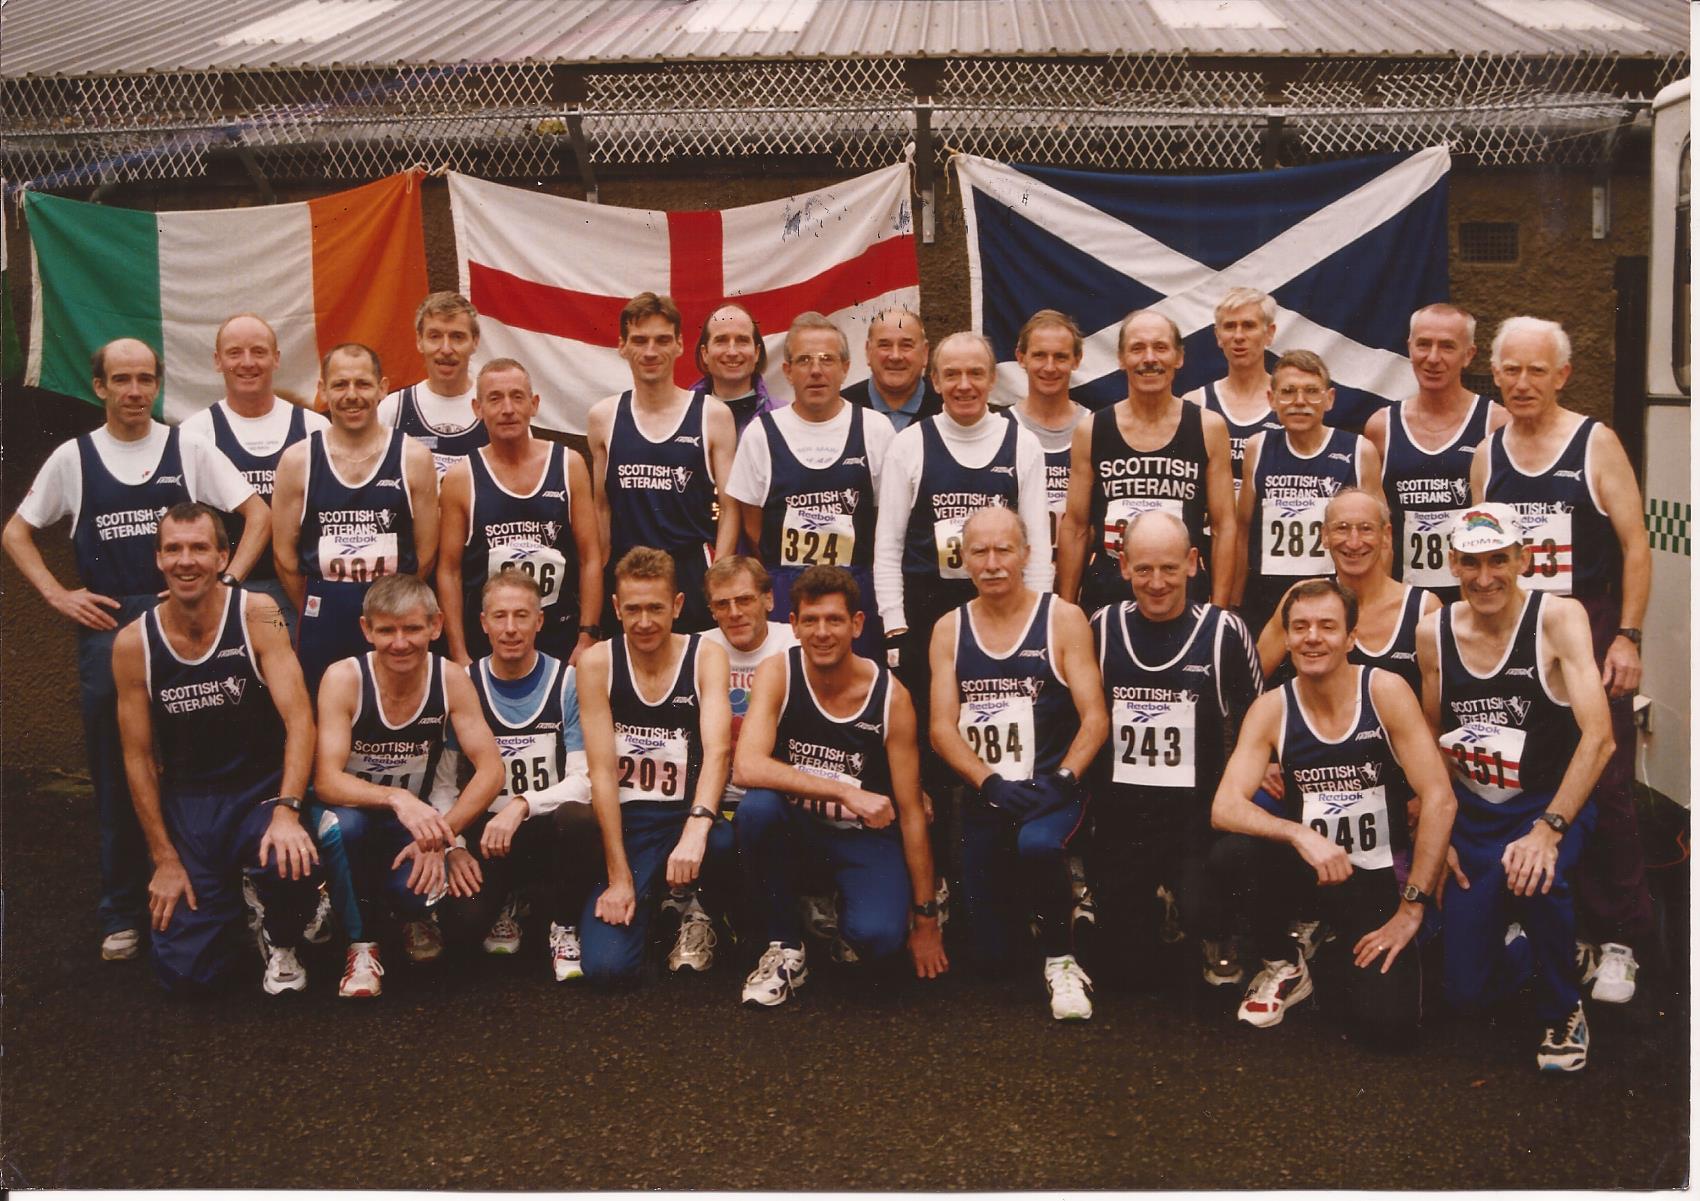 Danny with the Scottish Vets team in Ballymena 1995